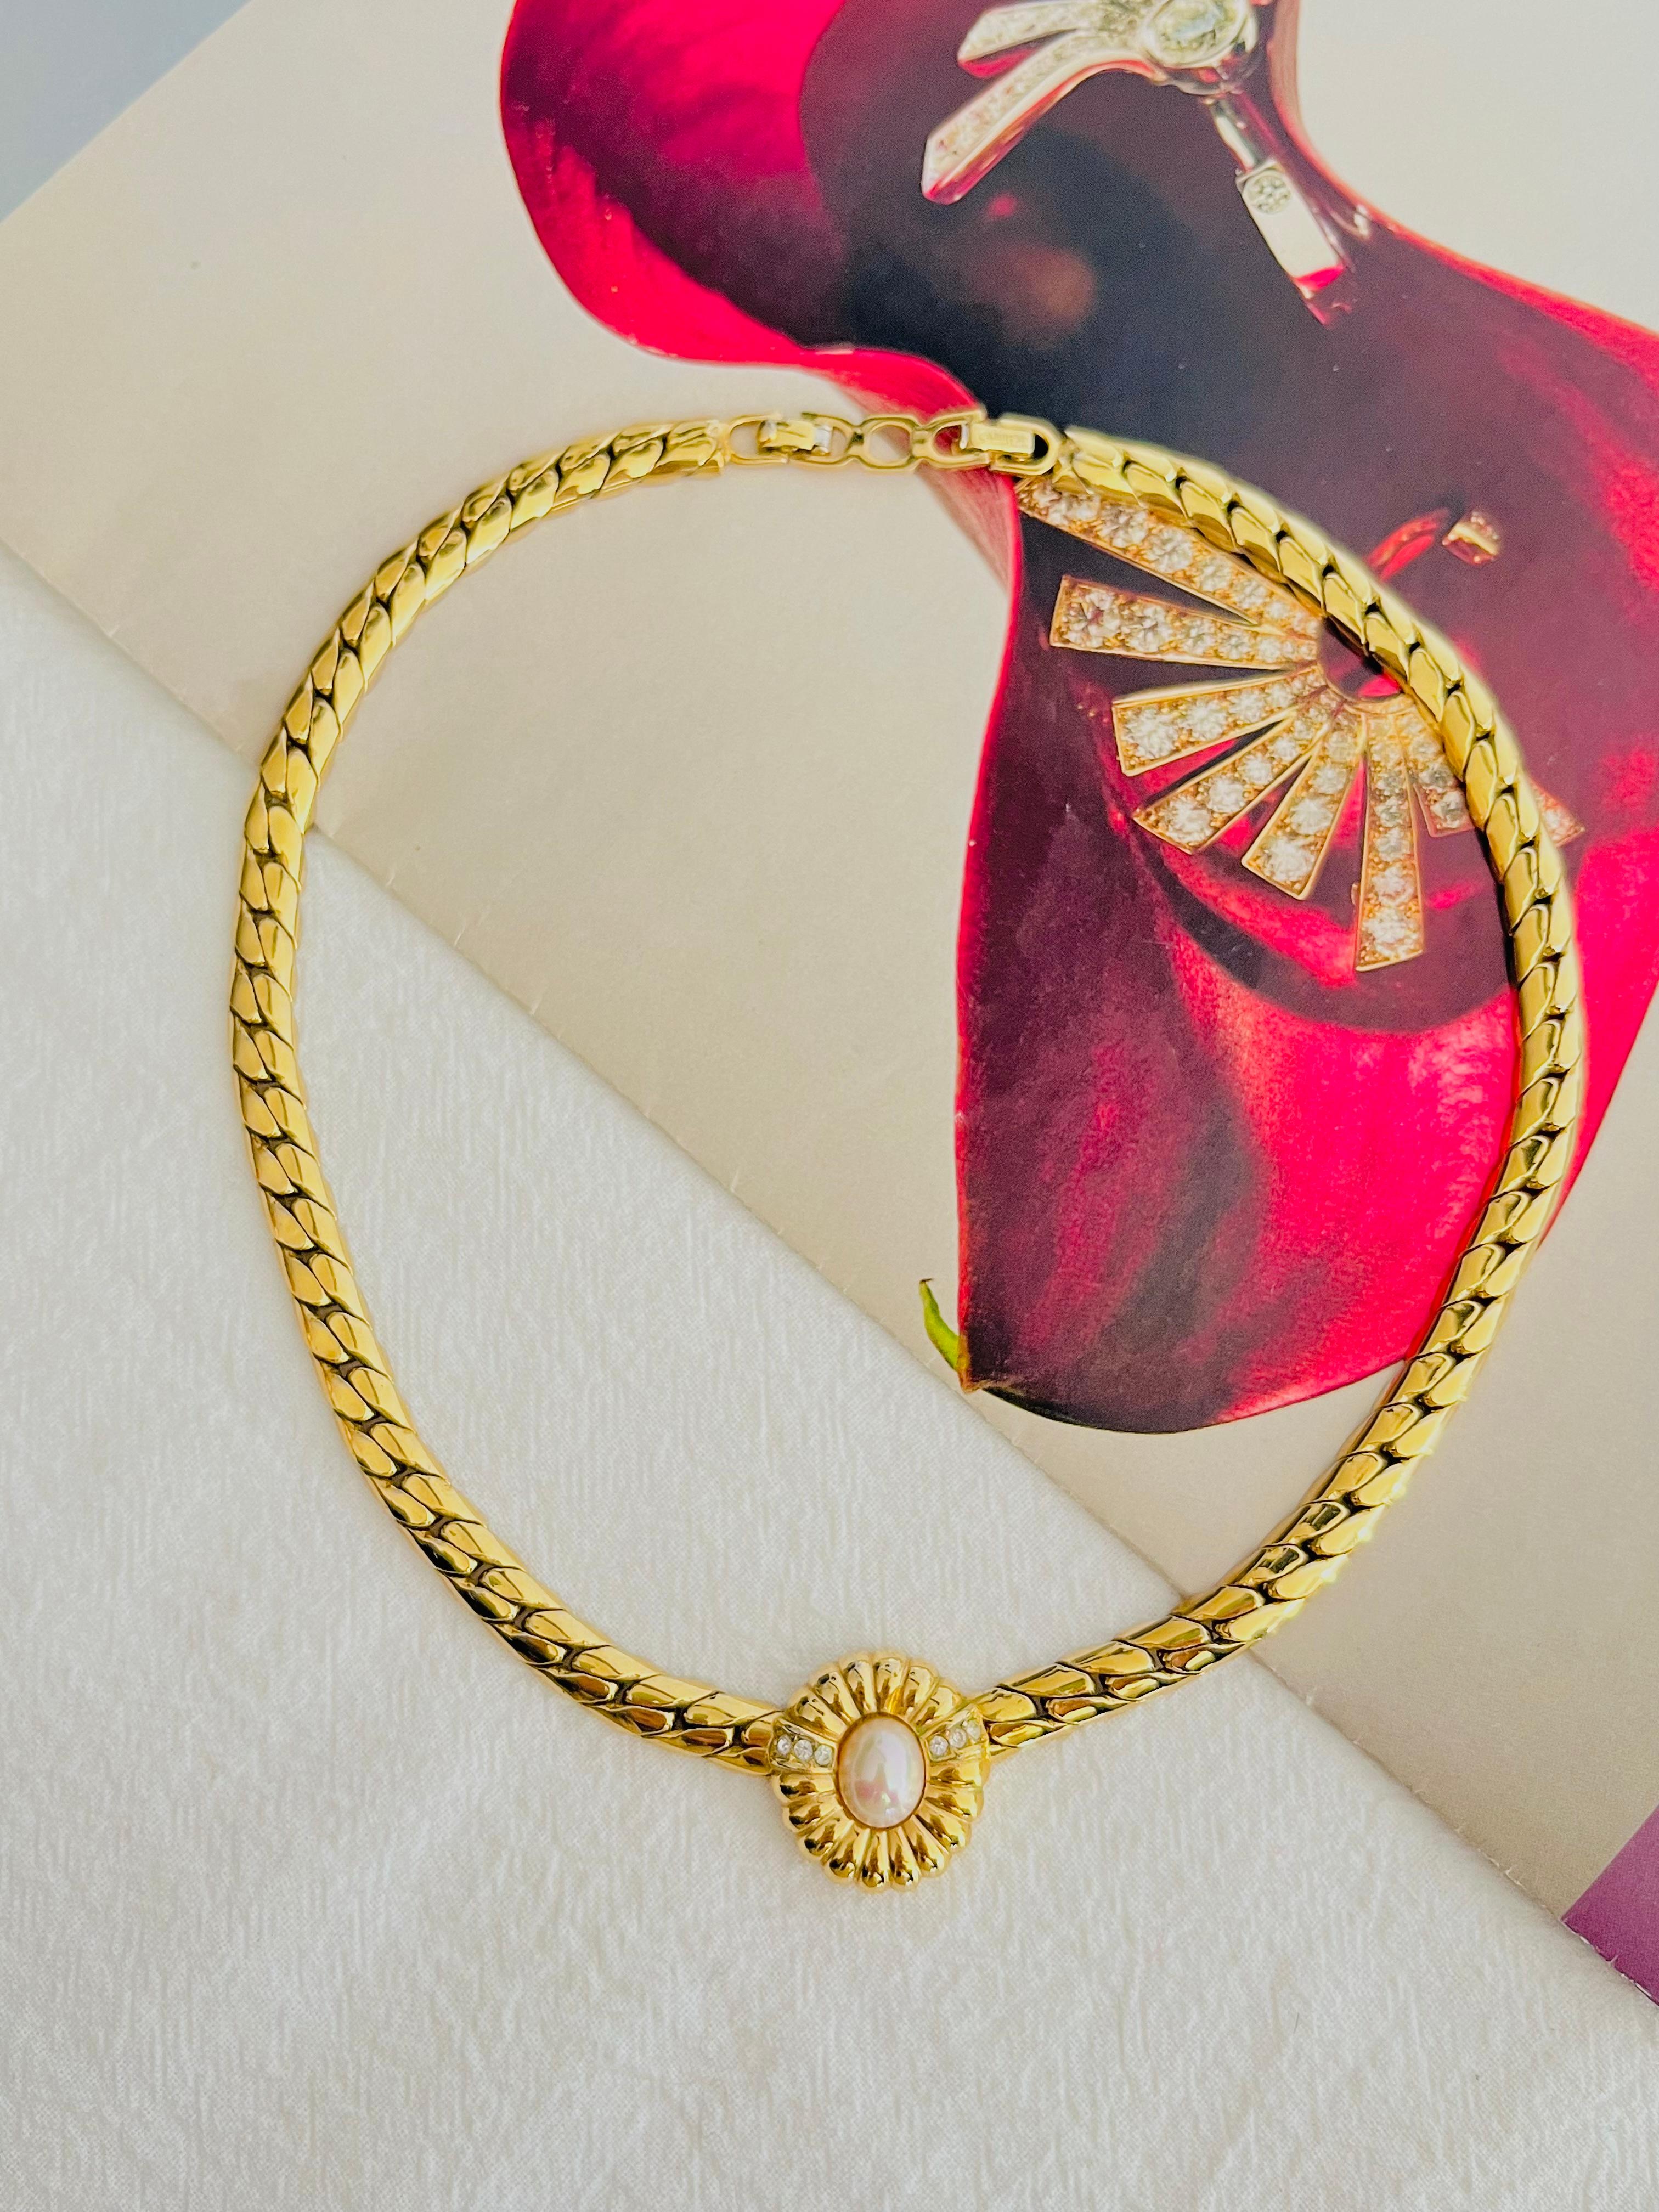 Very good condition. Light scratches or colour loss, barely noticeable. 

100% Genuine.  Rare to find. Marked 'Chr.Dior (C) '.

It is around 50 years old. This is a very stylish and rare piece of jewellery.

Length: 36 cm. Extend chain: 2 cm.